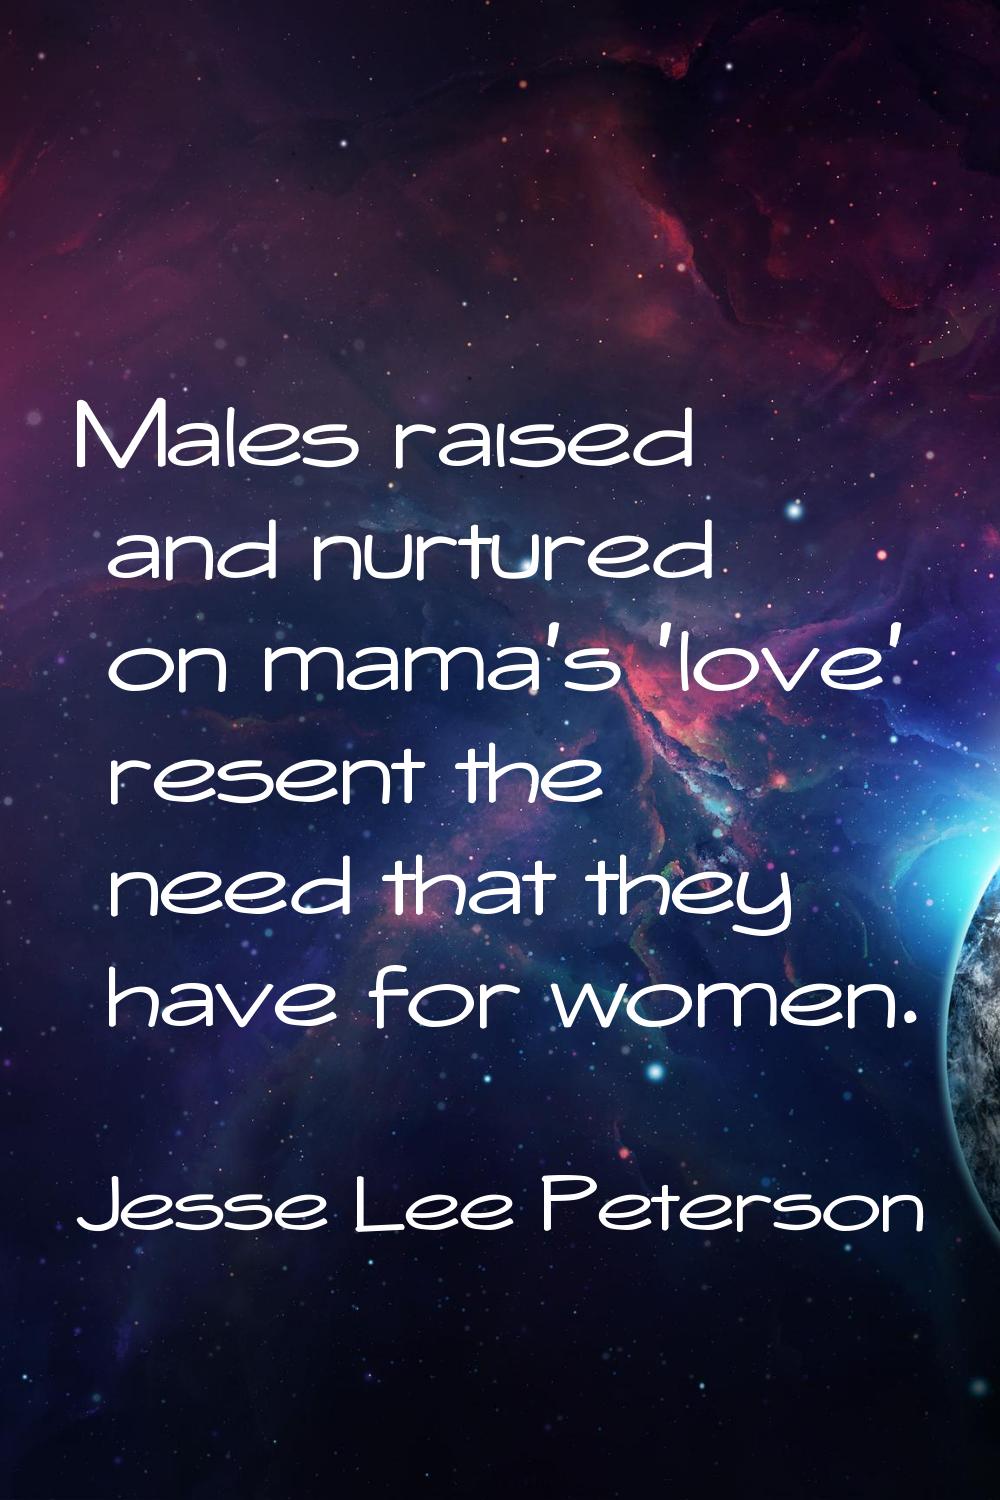 Males raised and nurtured on mama's 'love' resent the need that they have for women.